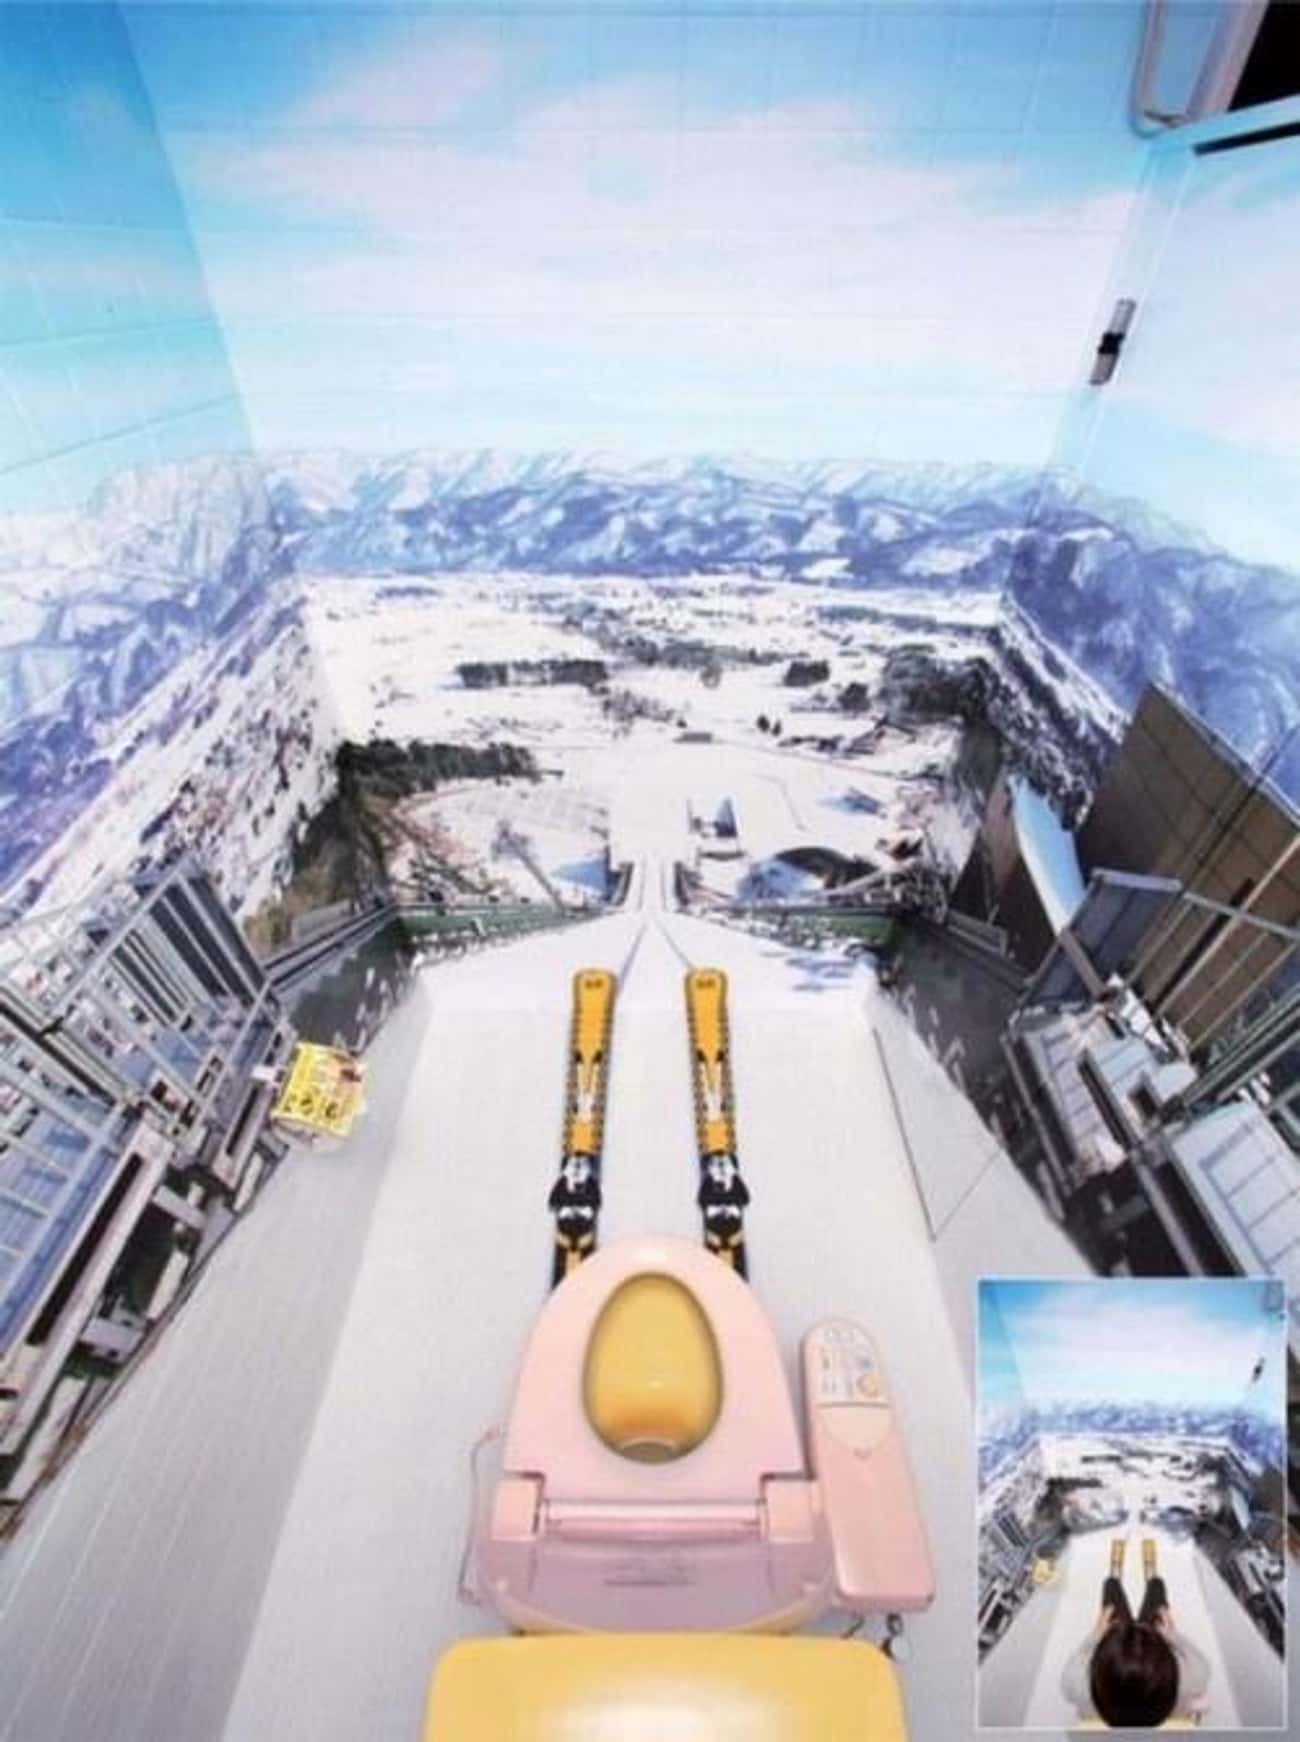 Skiing and Peeing